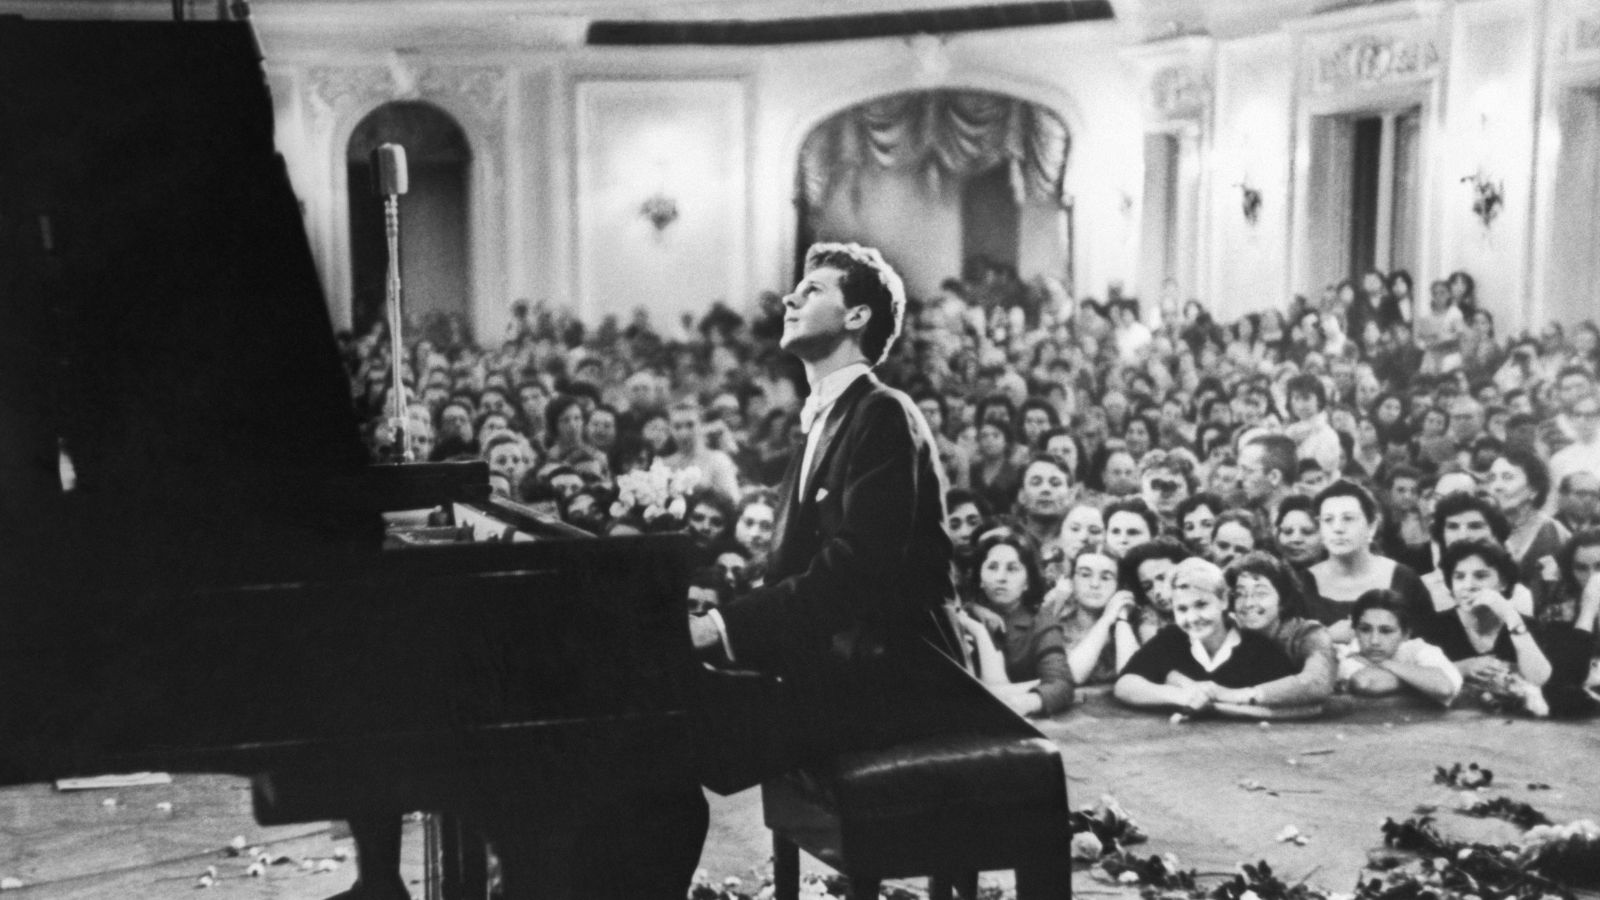 Van Cliburn Steinway And Sons Piano Artist Available in Spirio Library